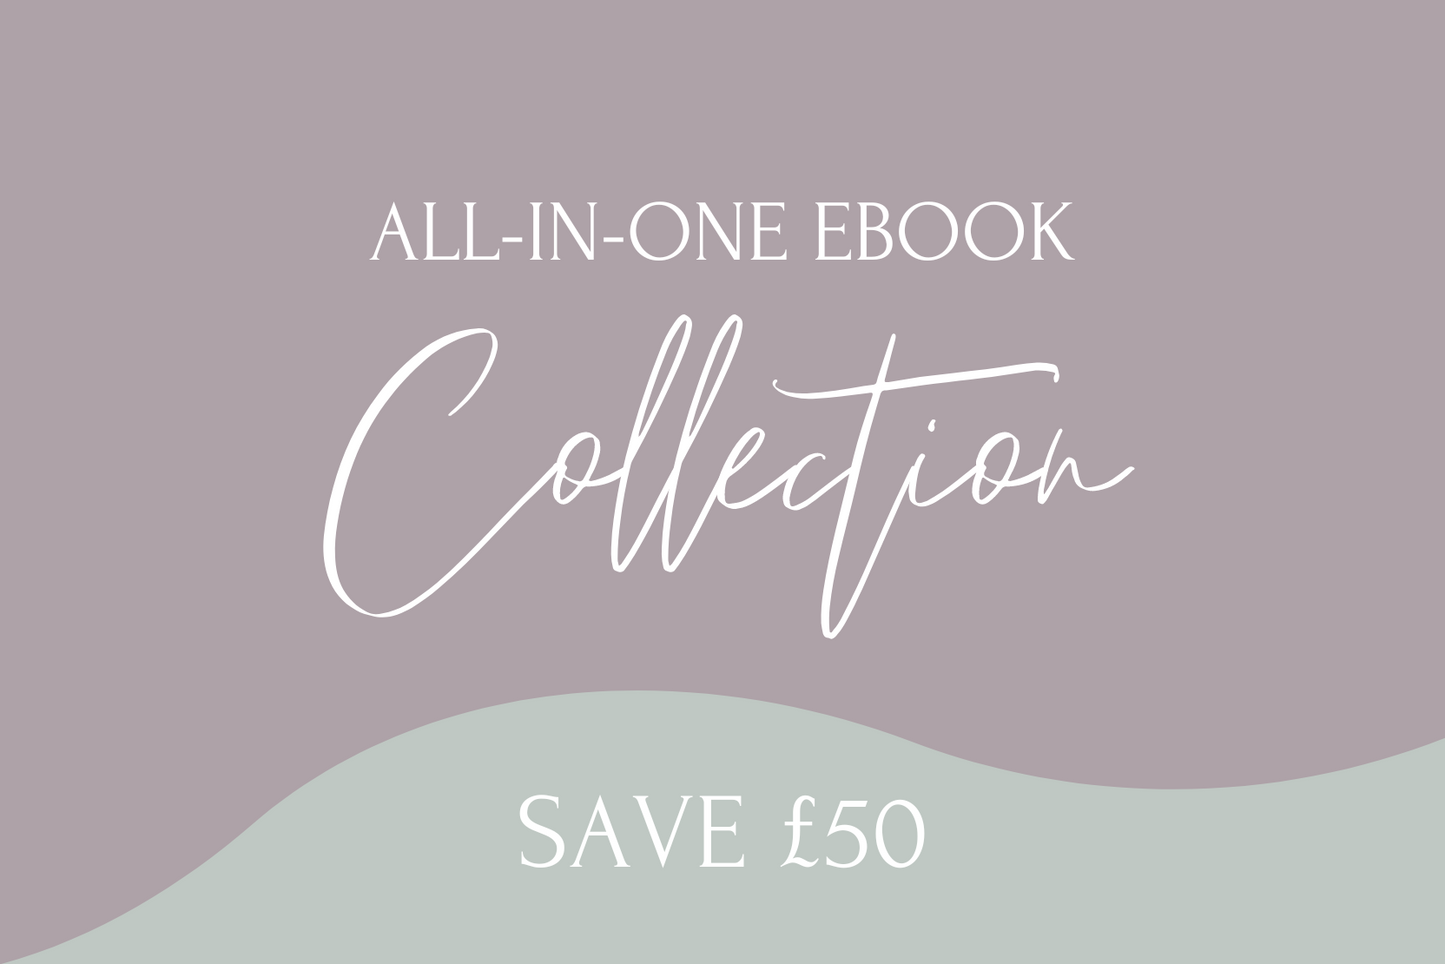 All-in-One eBook Collection